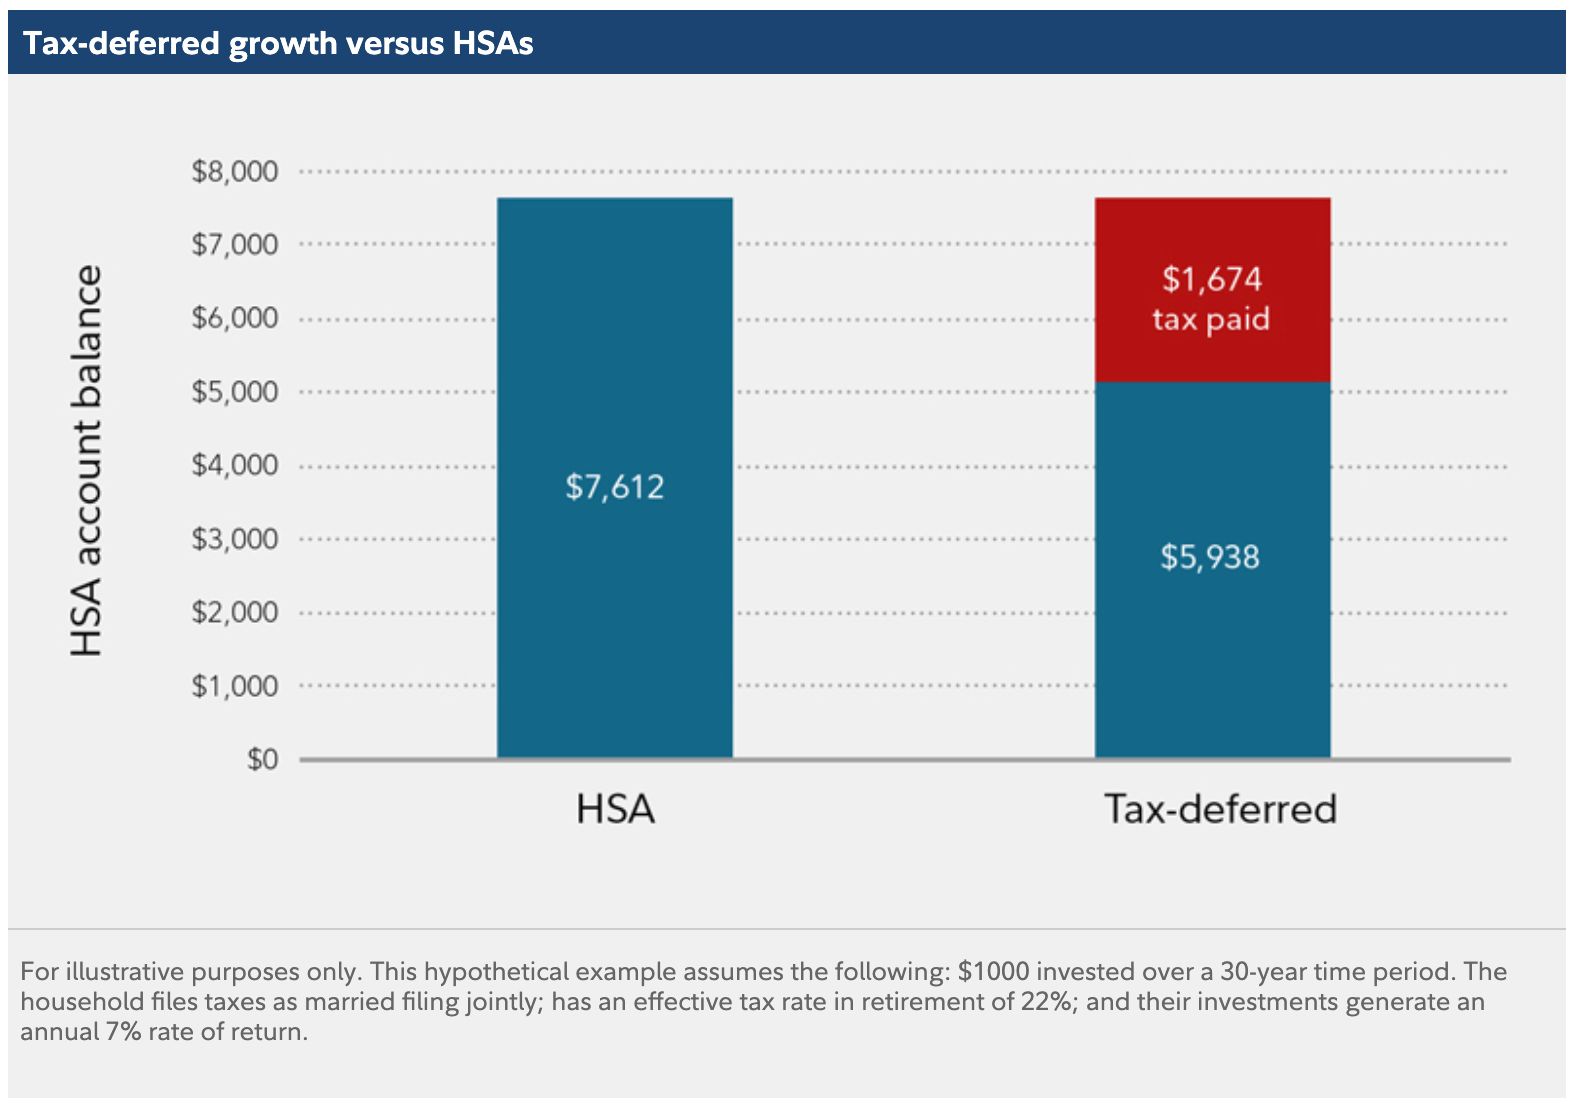 Fidelity’s tax-deferred growth versus HSAs chart